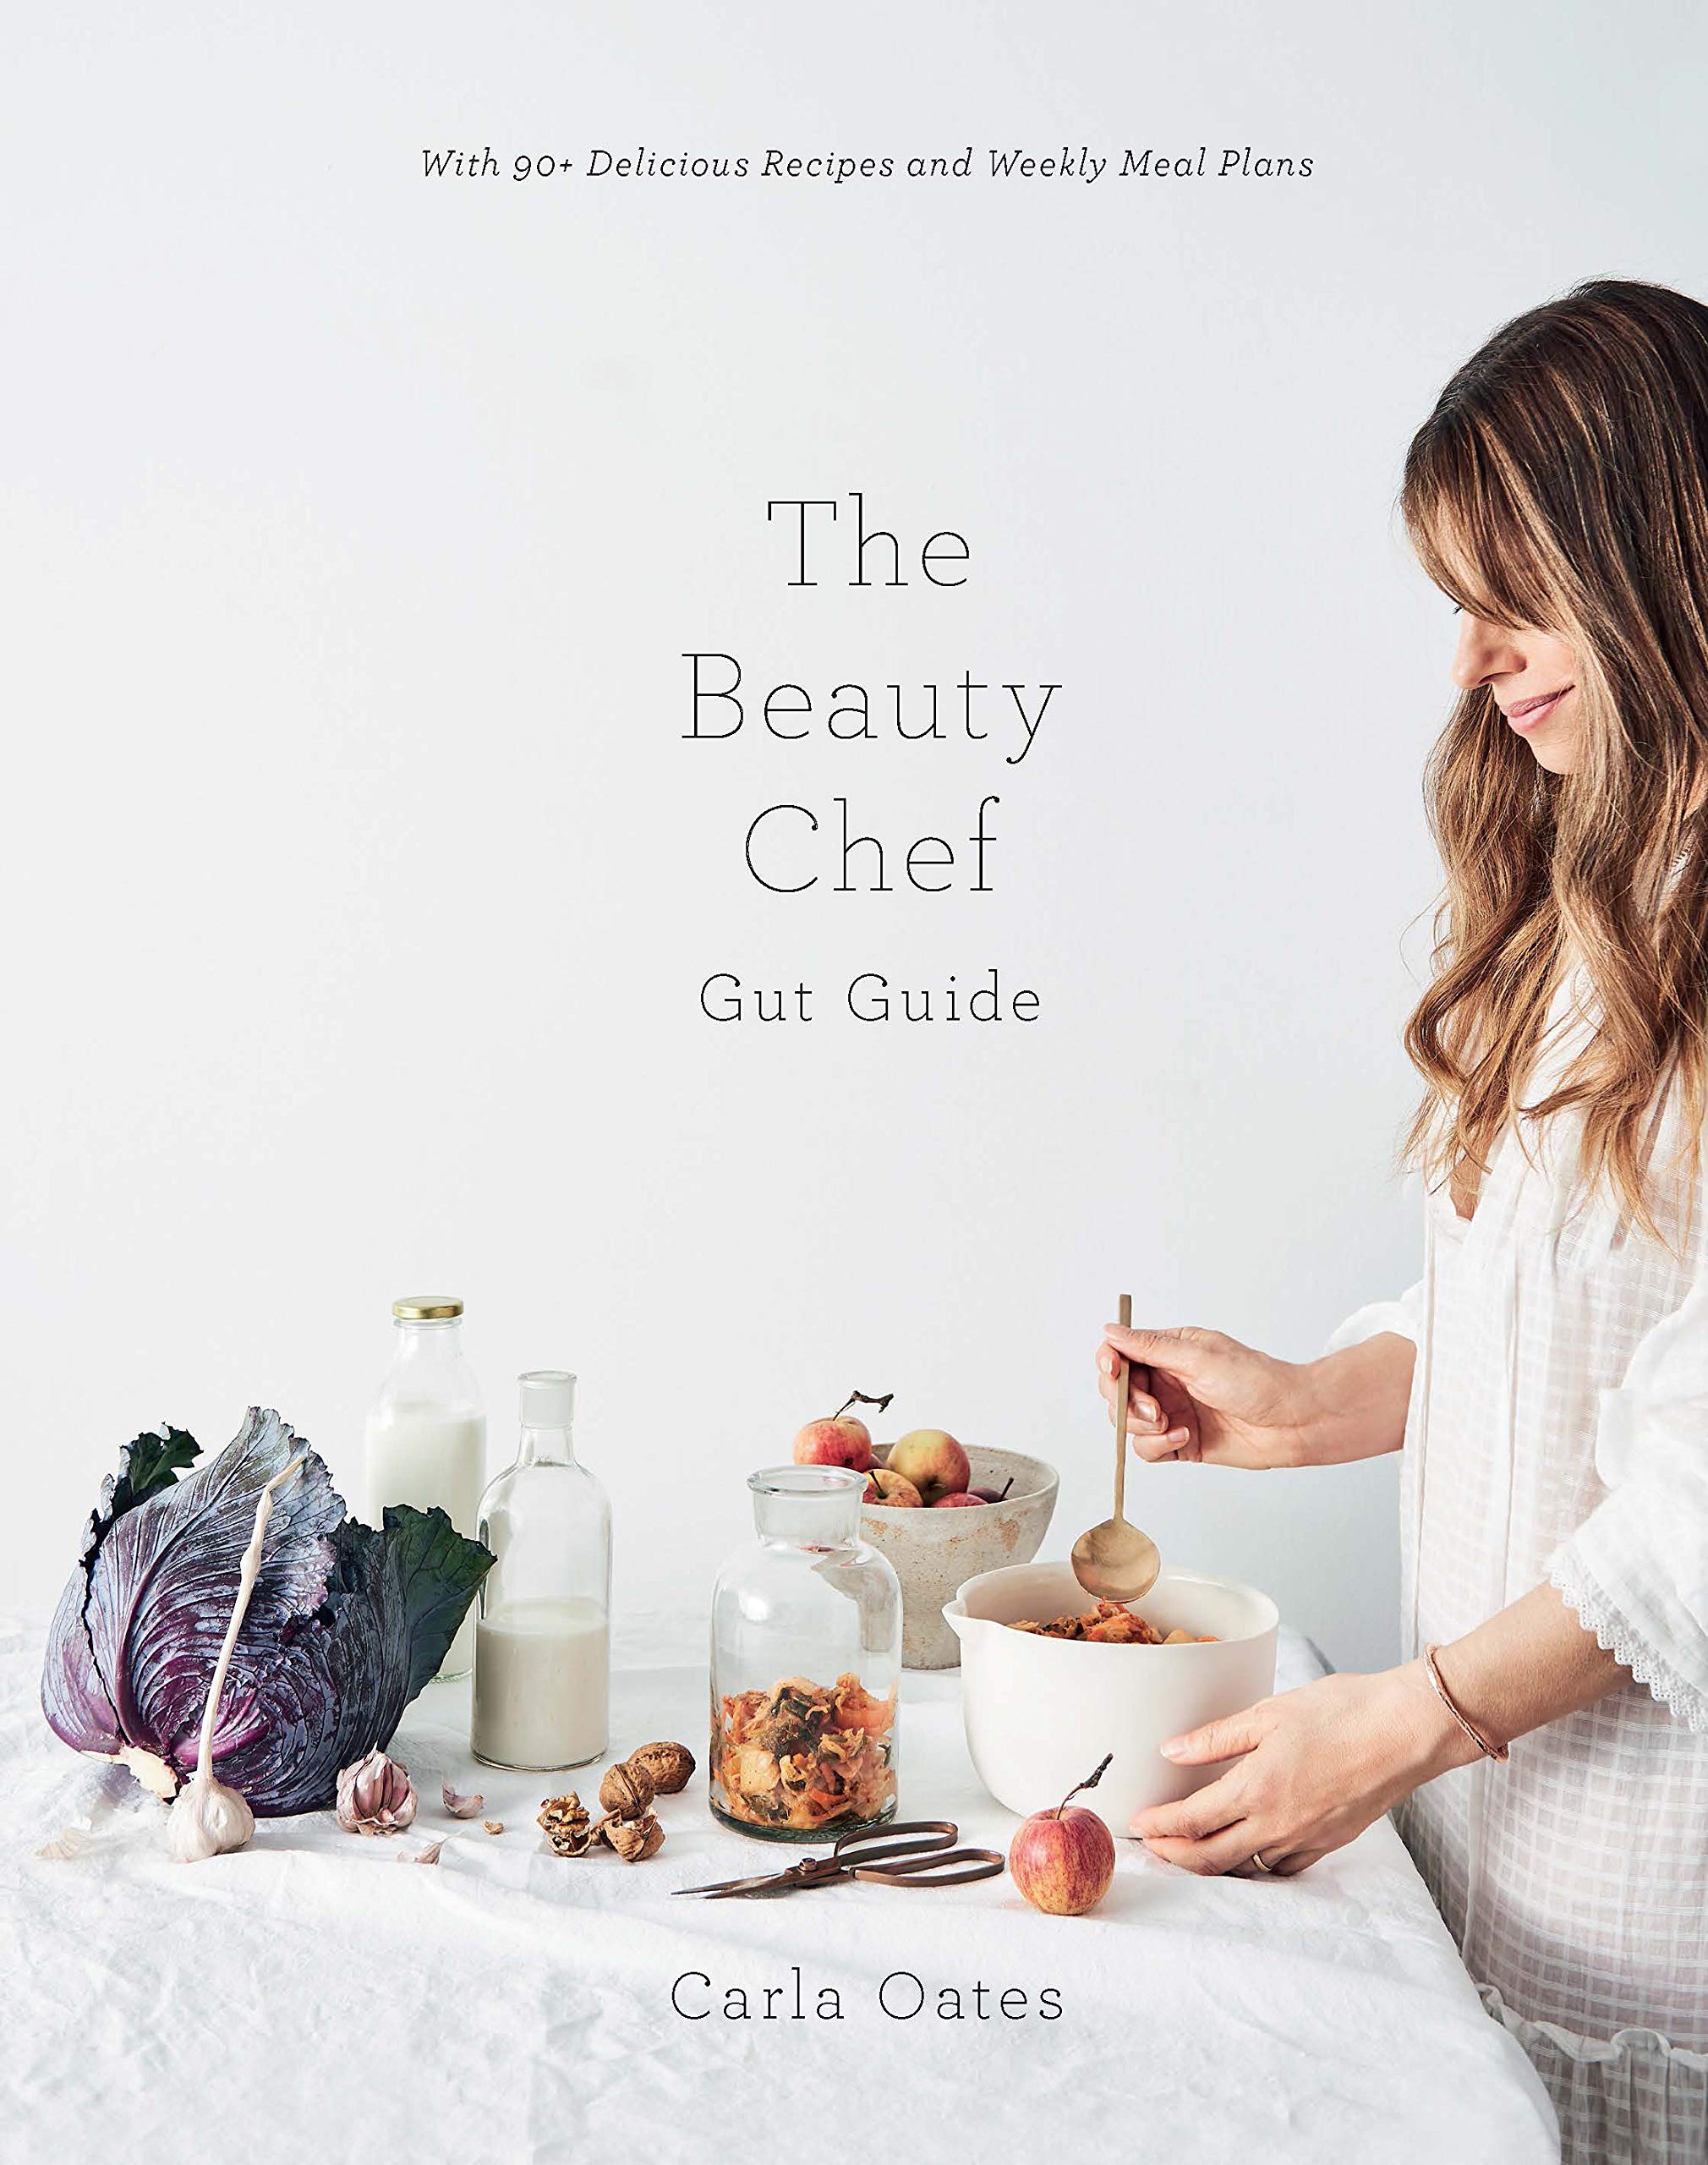 The Beauty Chef Gut Guide: With 90+ Delicious Recipes and Weekly Meal Plans